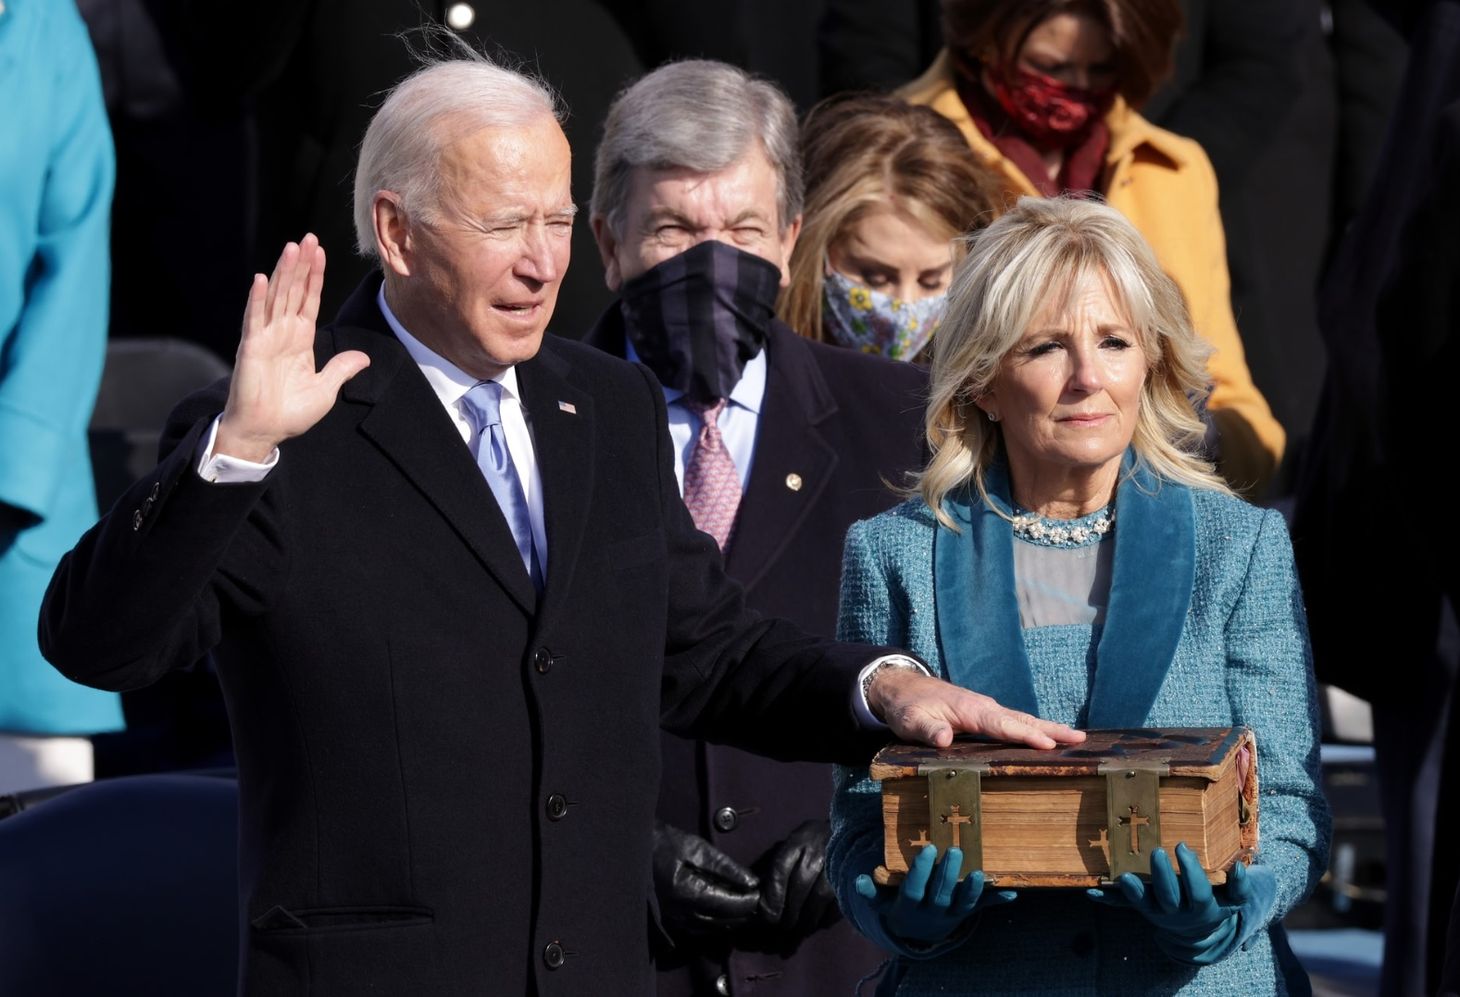 Chicago-area man gets 3 years for threat at Biden inaugural